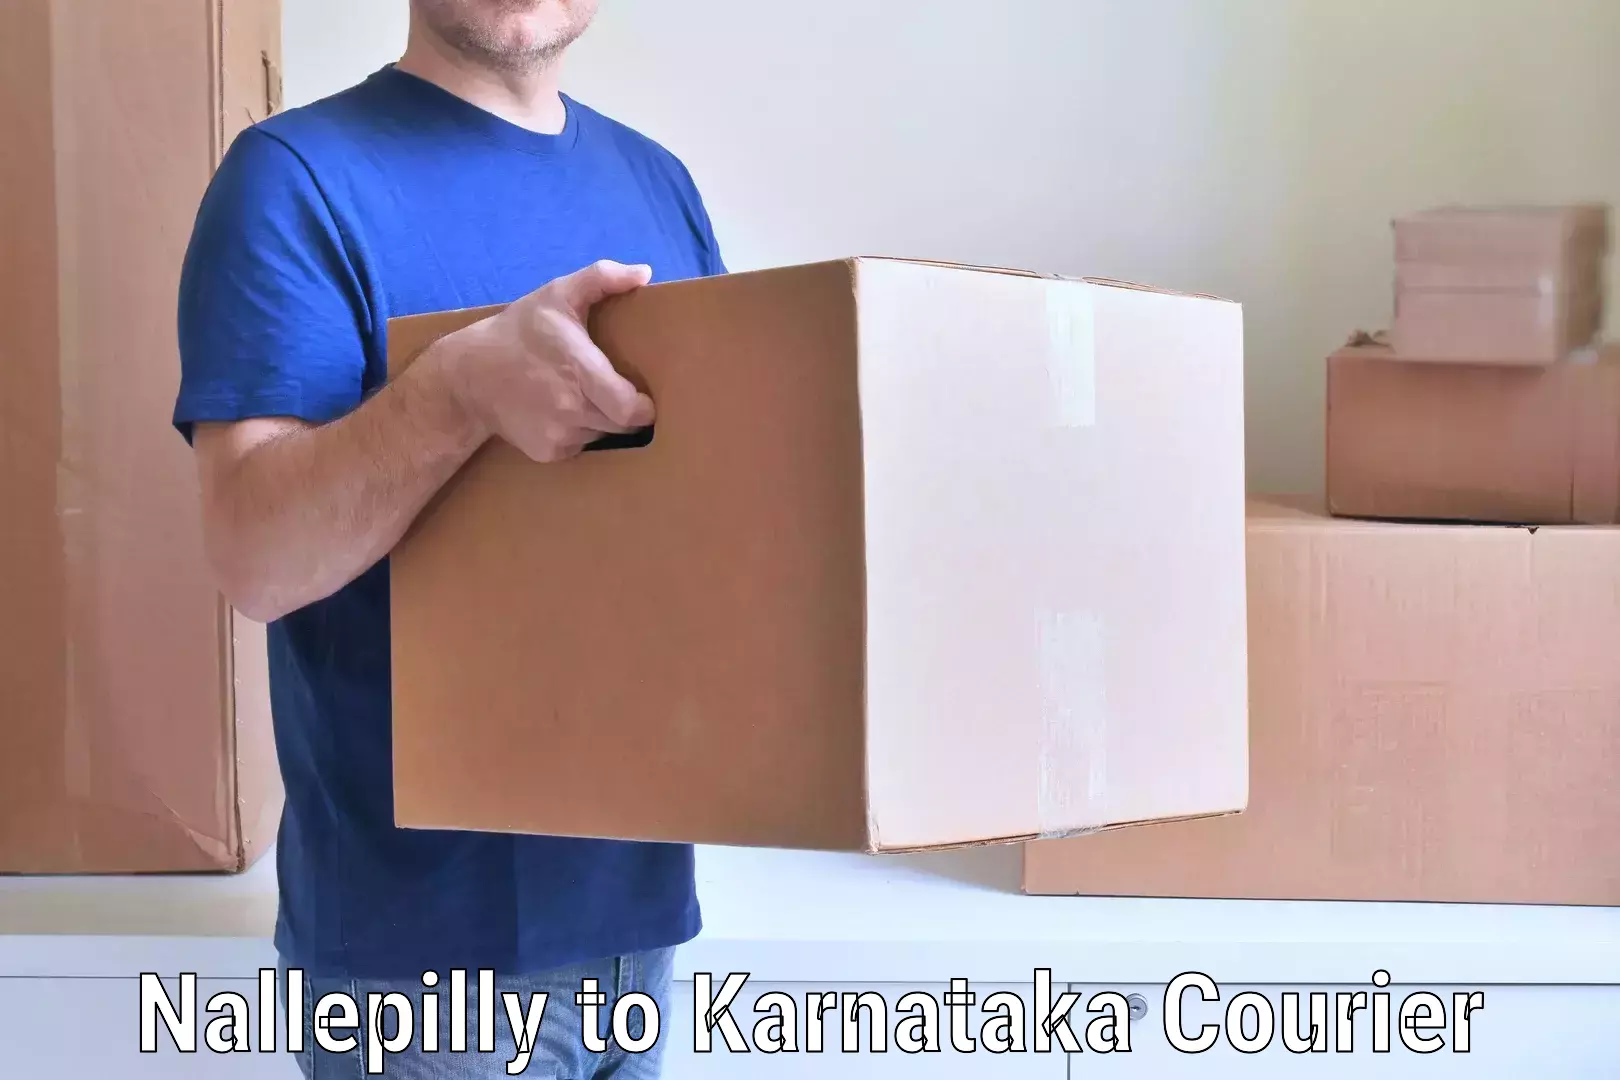 Furniture delivery service Nallepilly to Yellapur